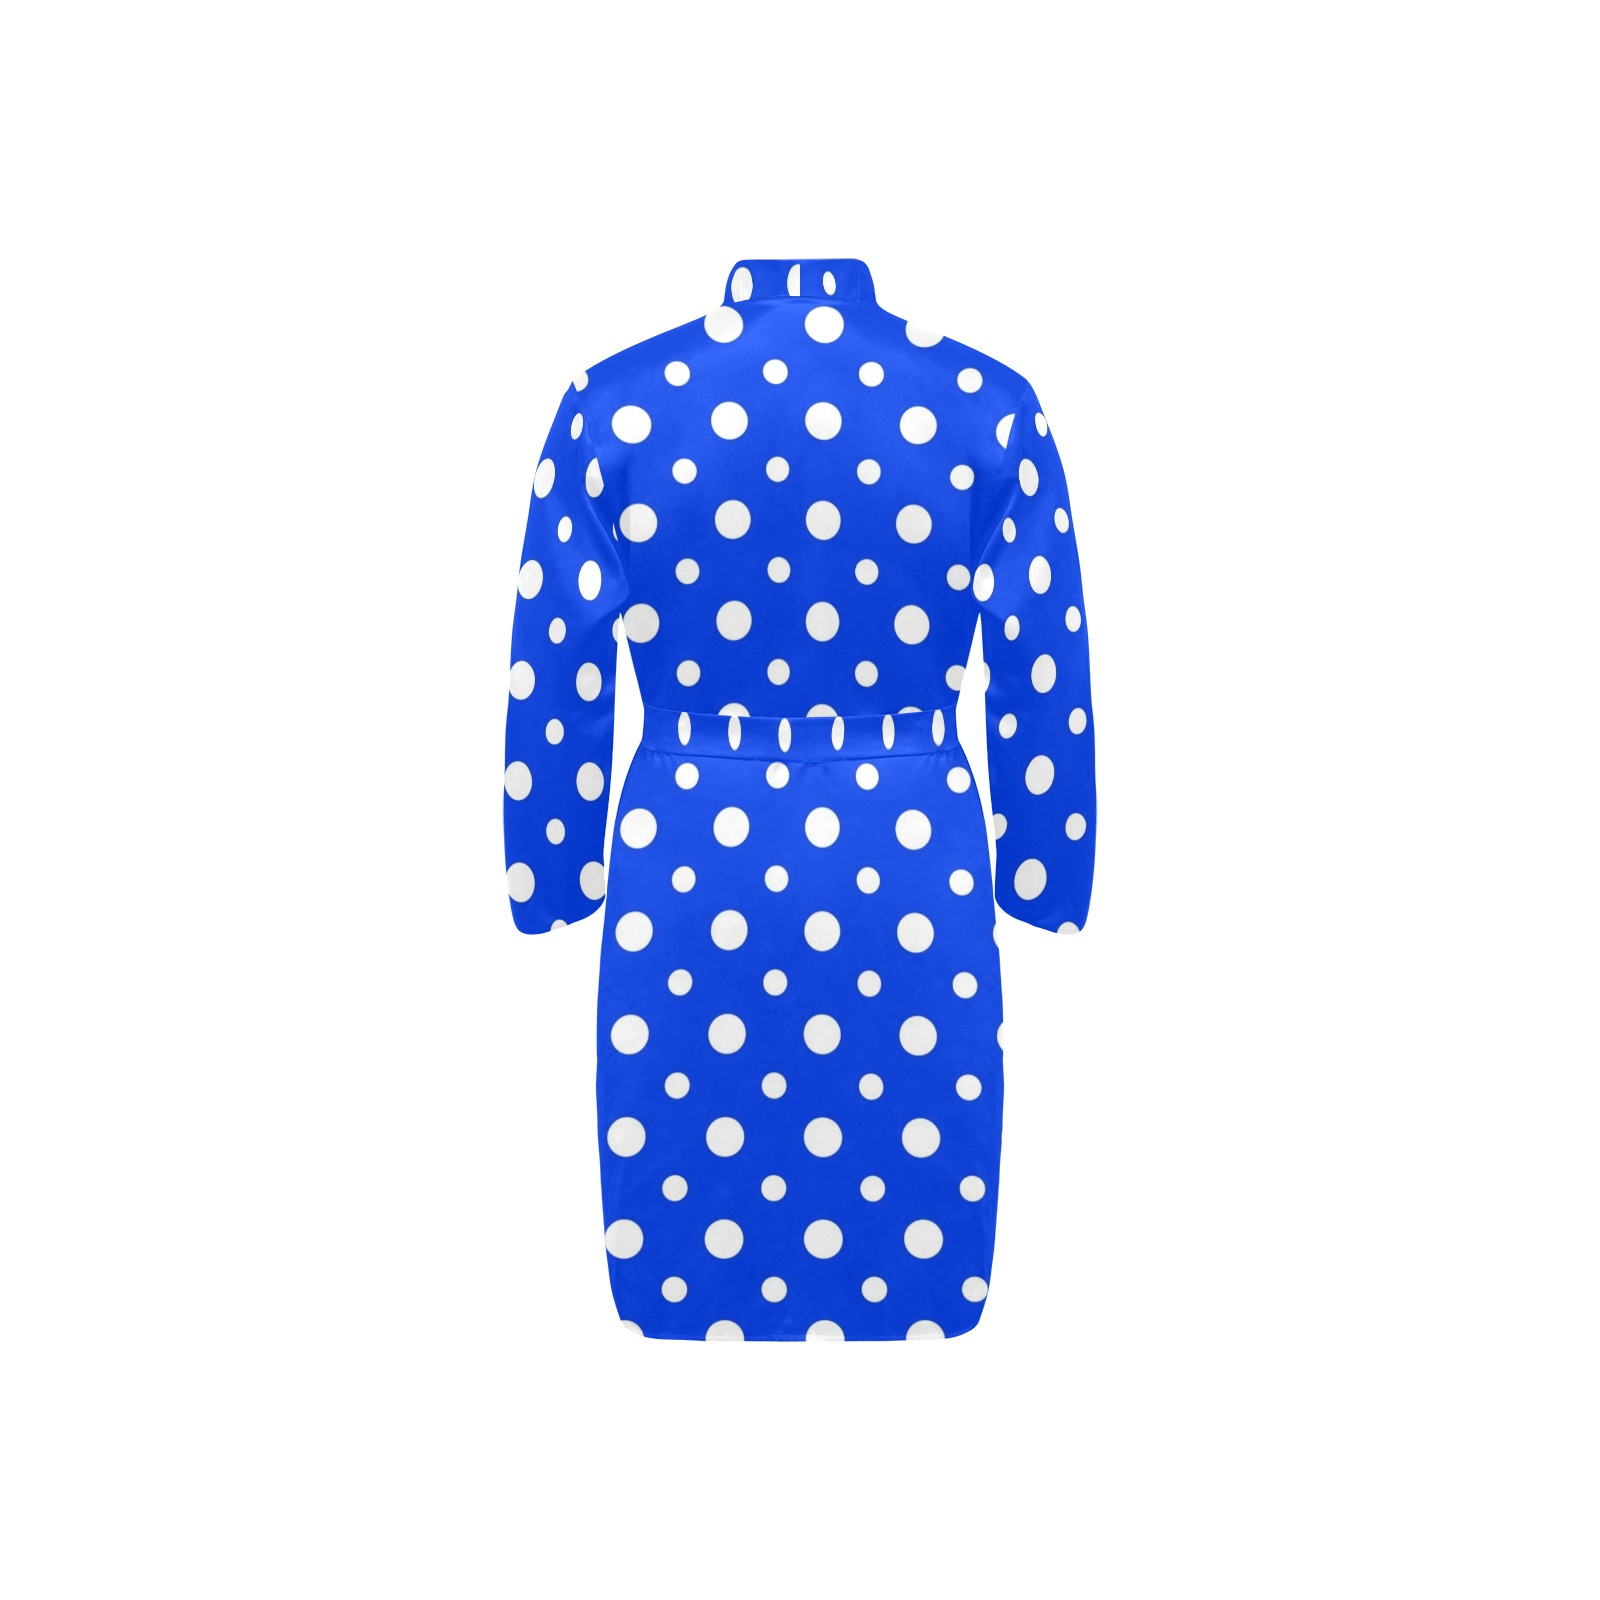 Blue and White Polka Dots Men's Long Sleeve Belted Night Robe (Model H56)